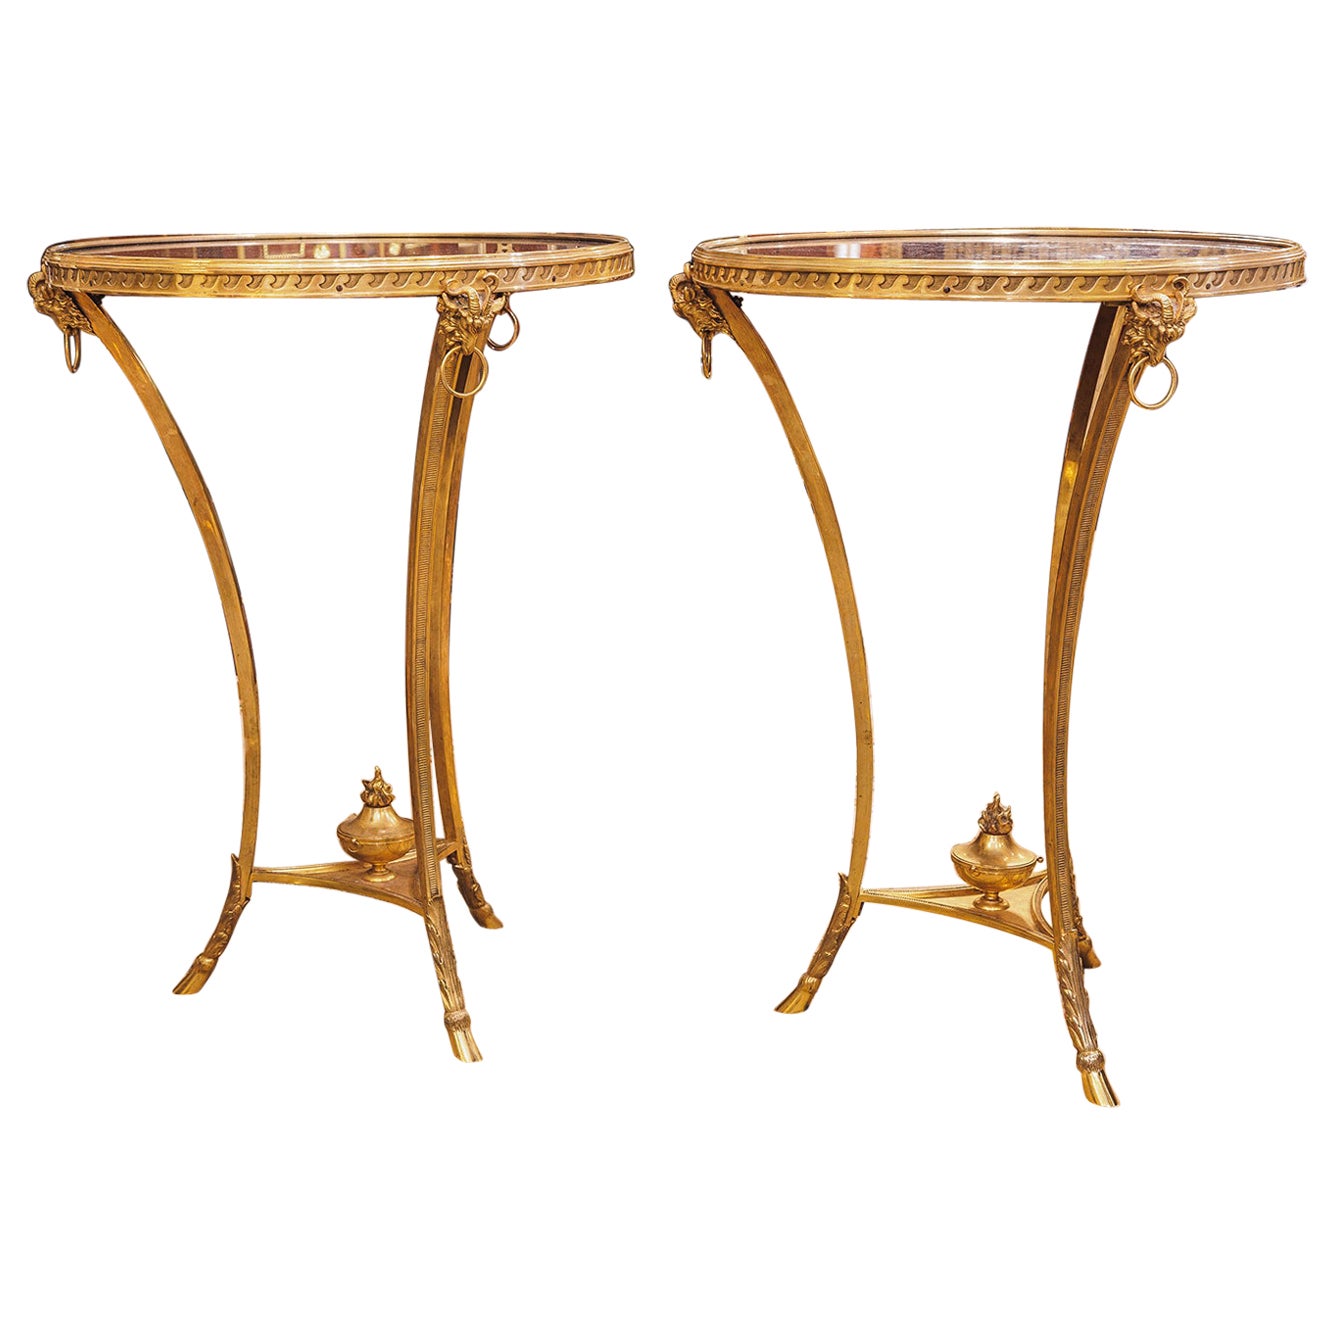 A very fine pair of 19th c French louis XVI marble top and gilt bronze gueridons For Sale